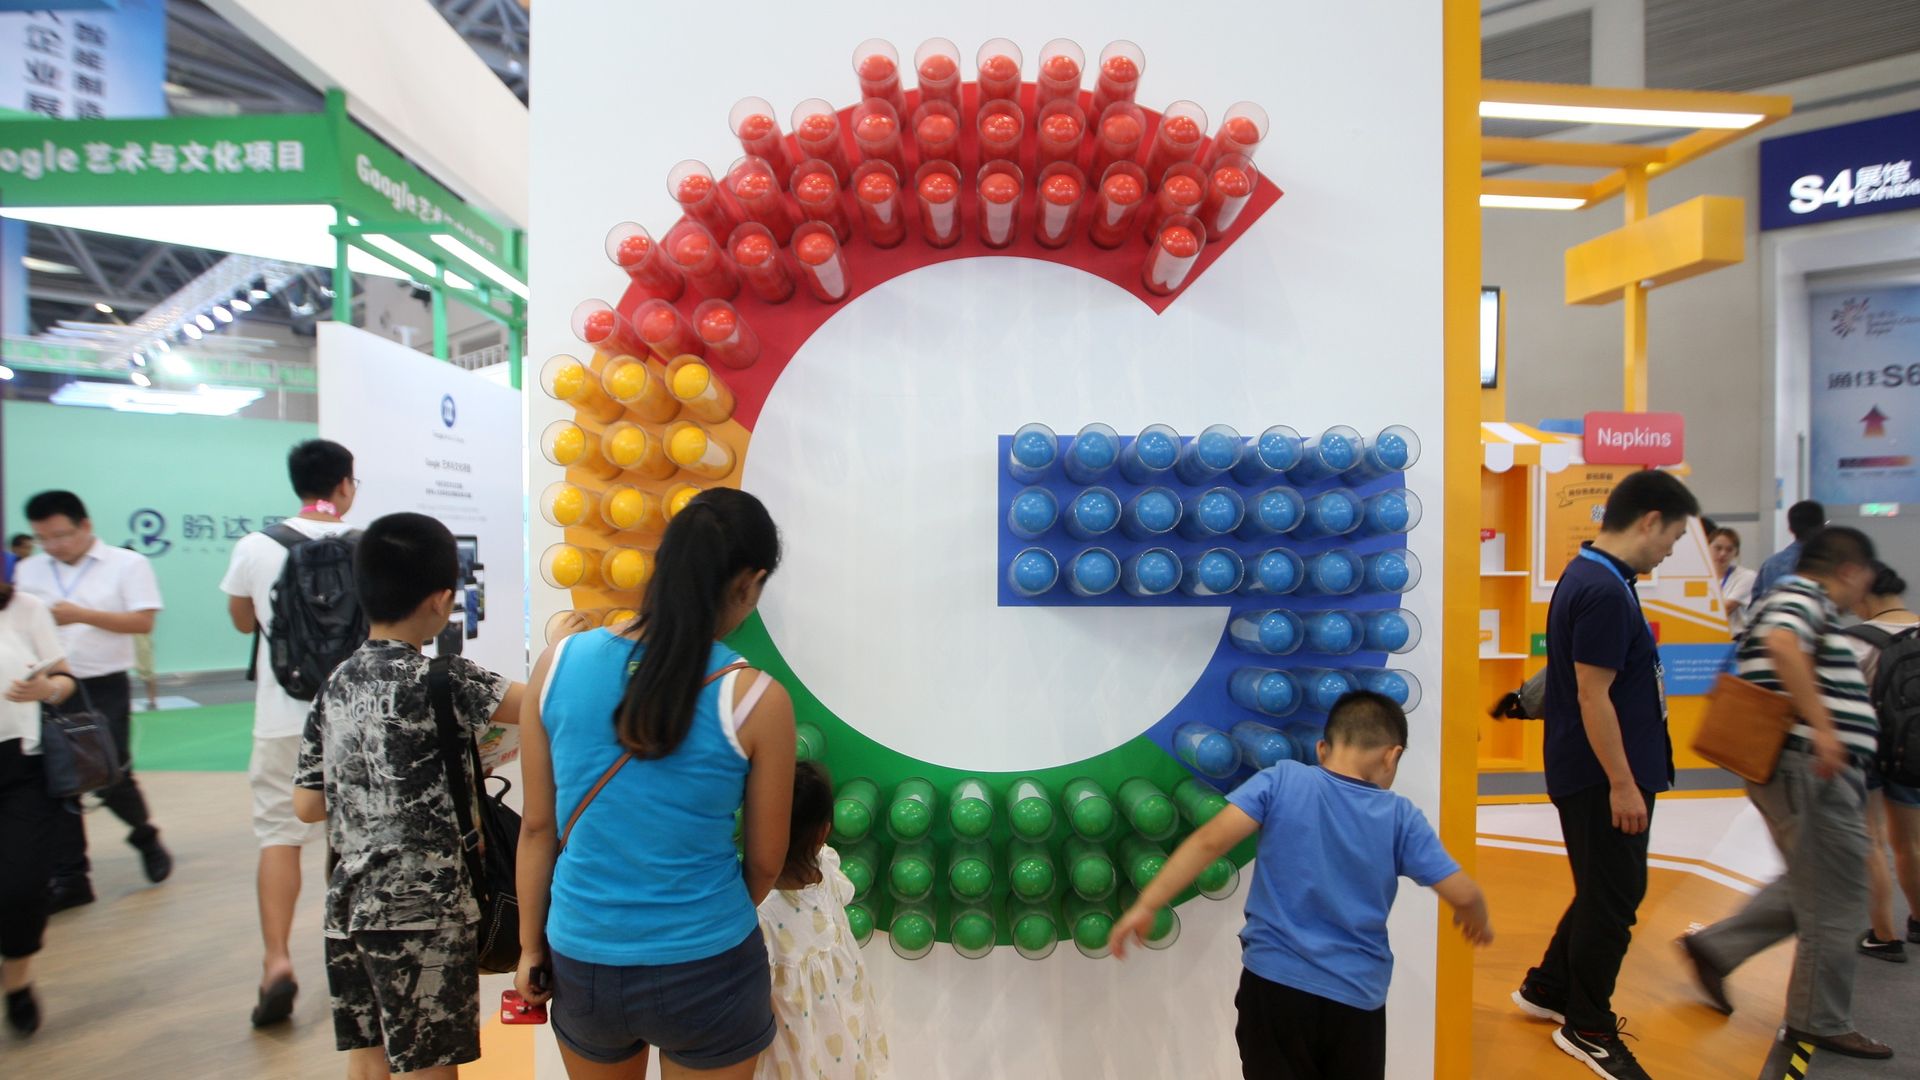 Red, yellow, green, and blue G symbolizing Google on a wall as people look on.